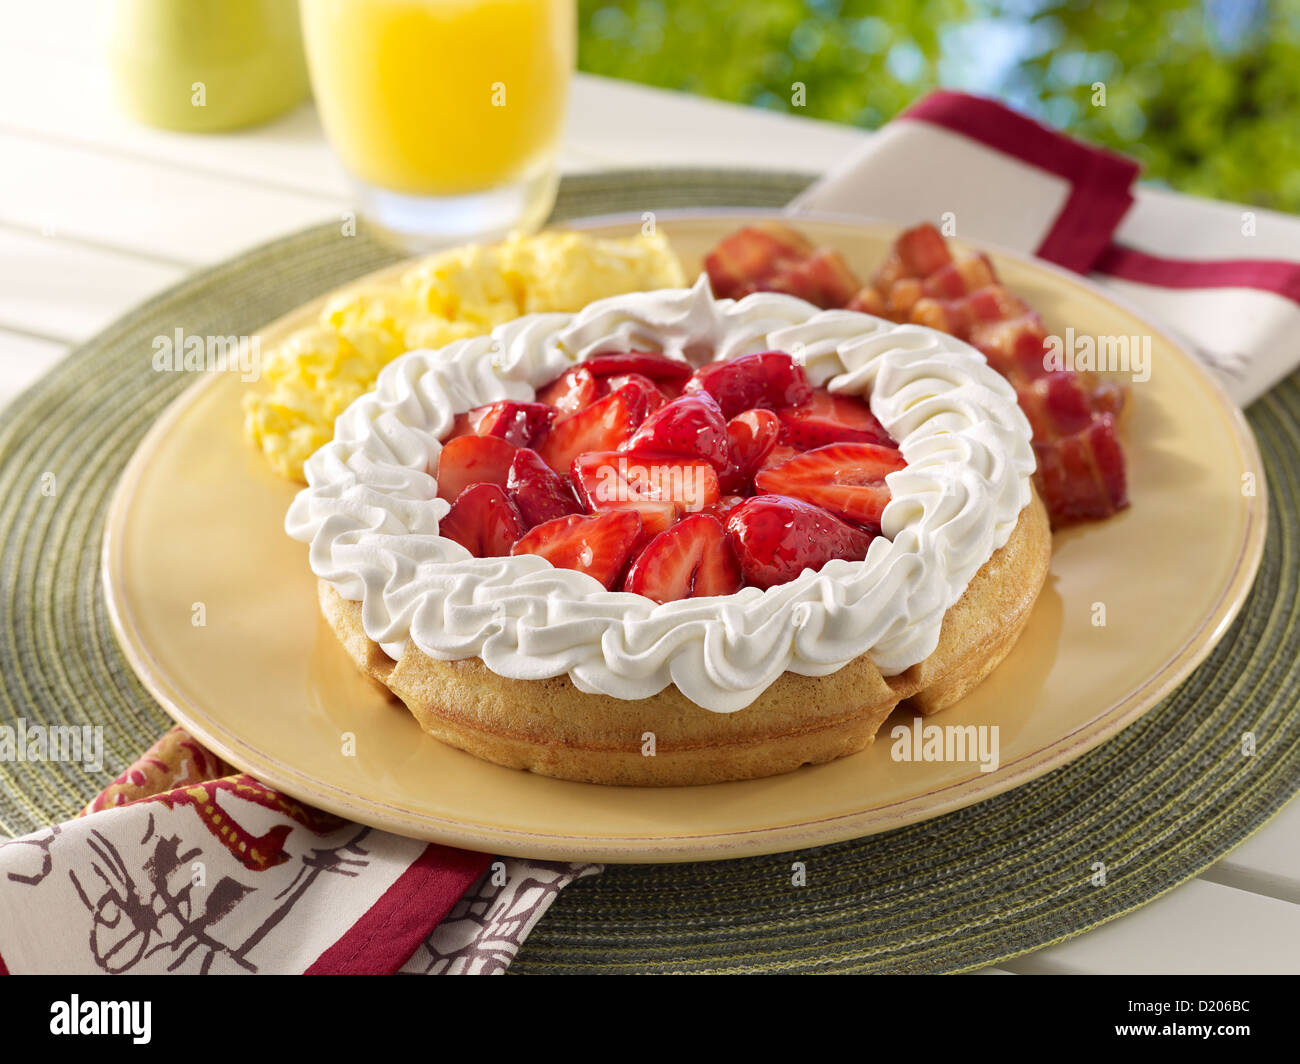 Strawberry waffle breakfast in an outdoor setting Stock Photo